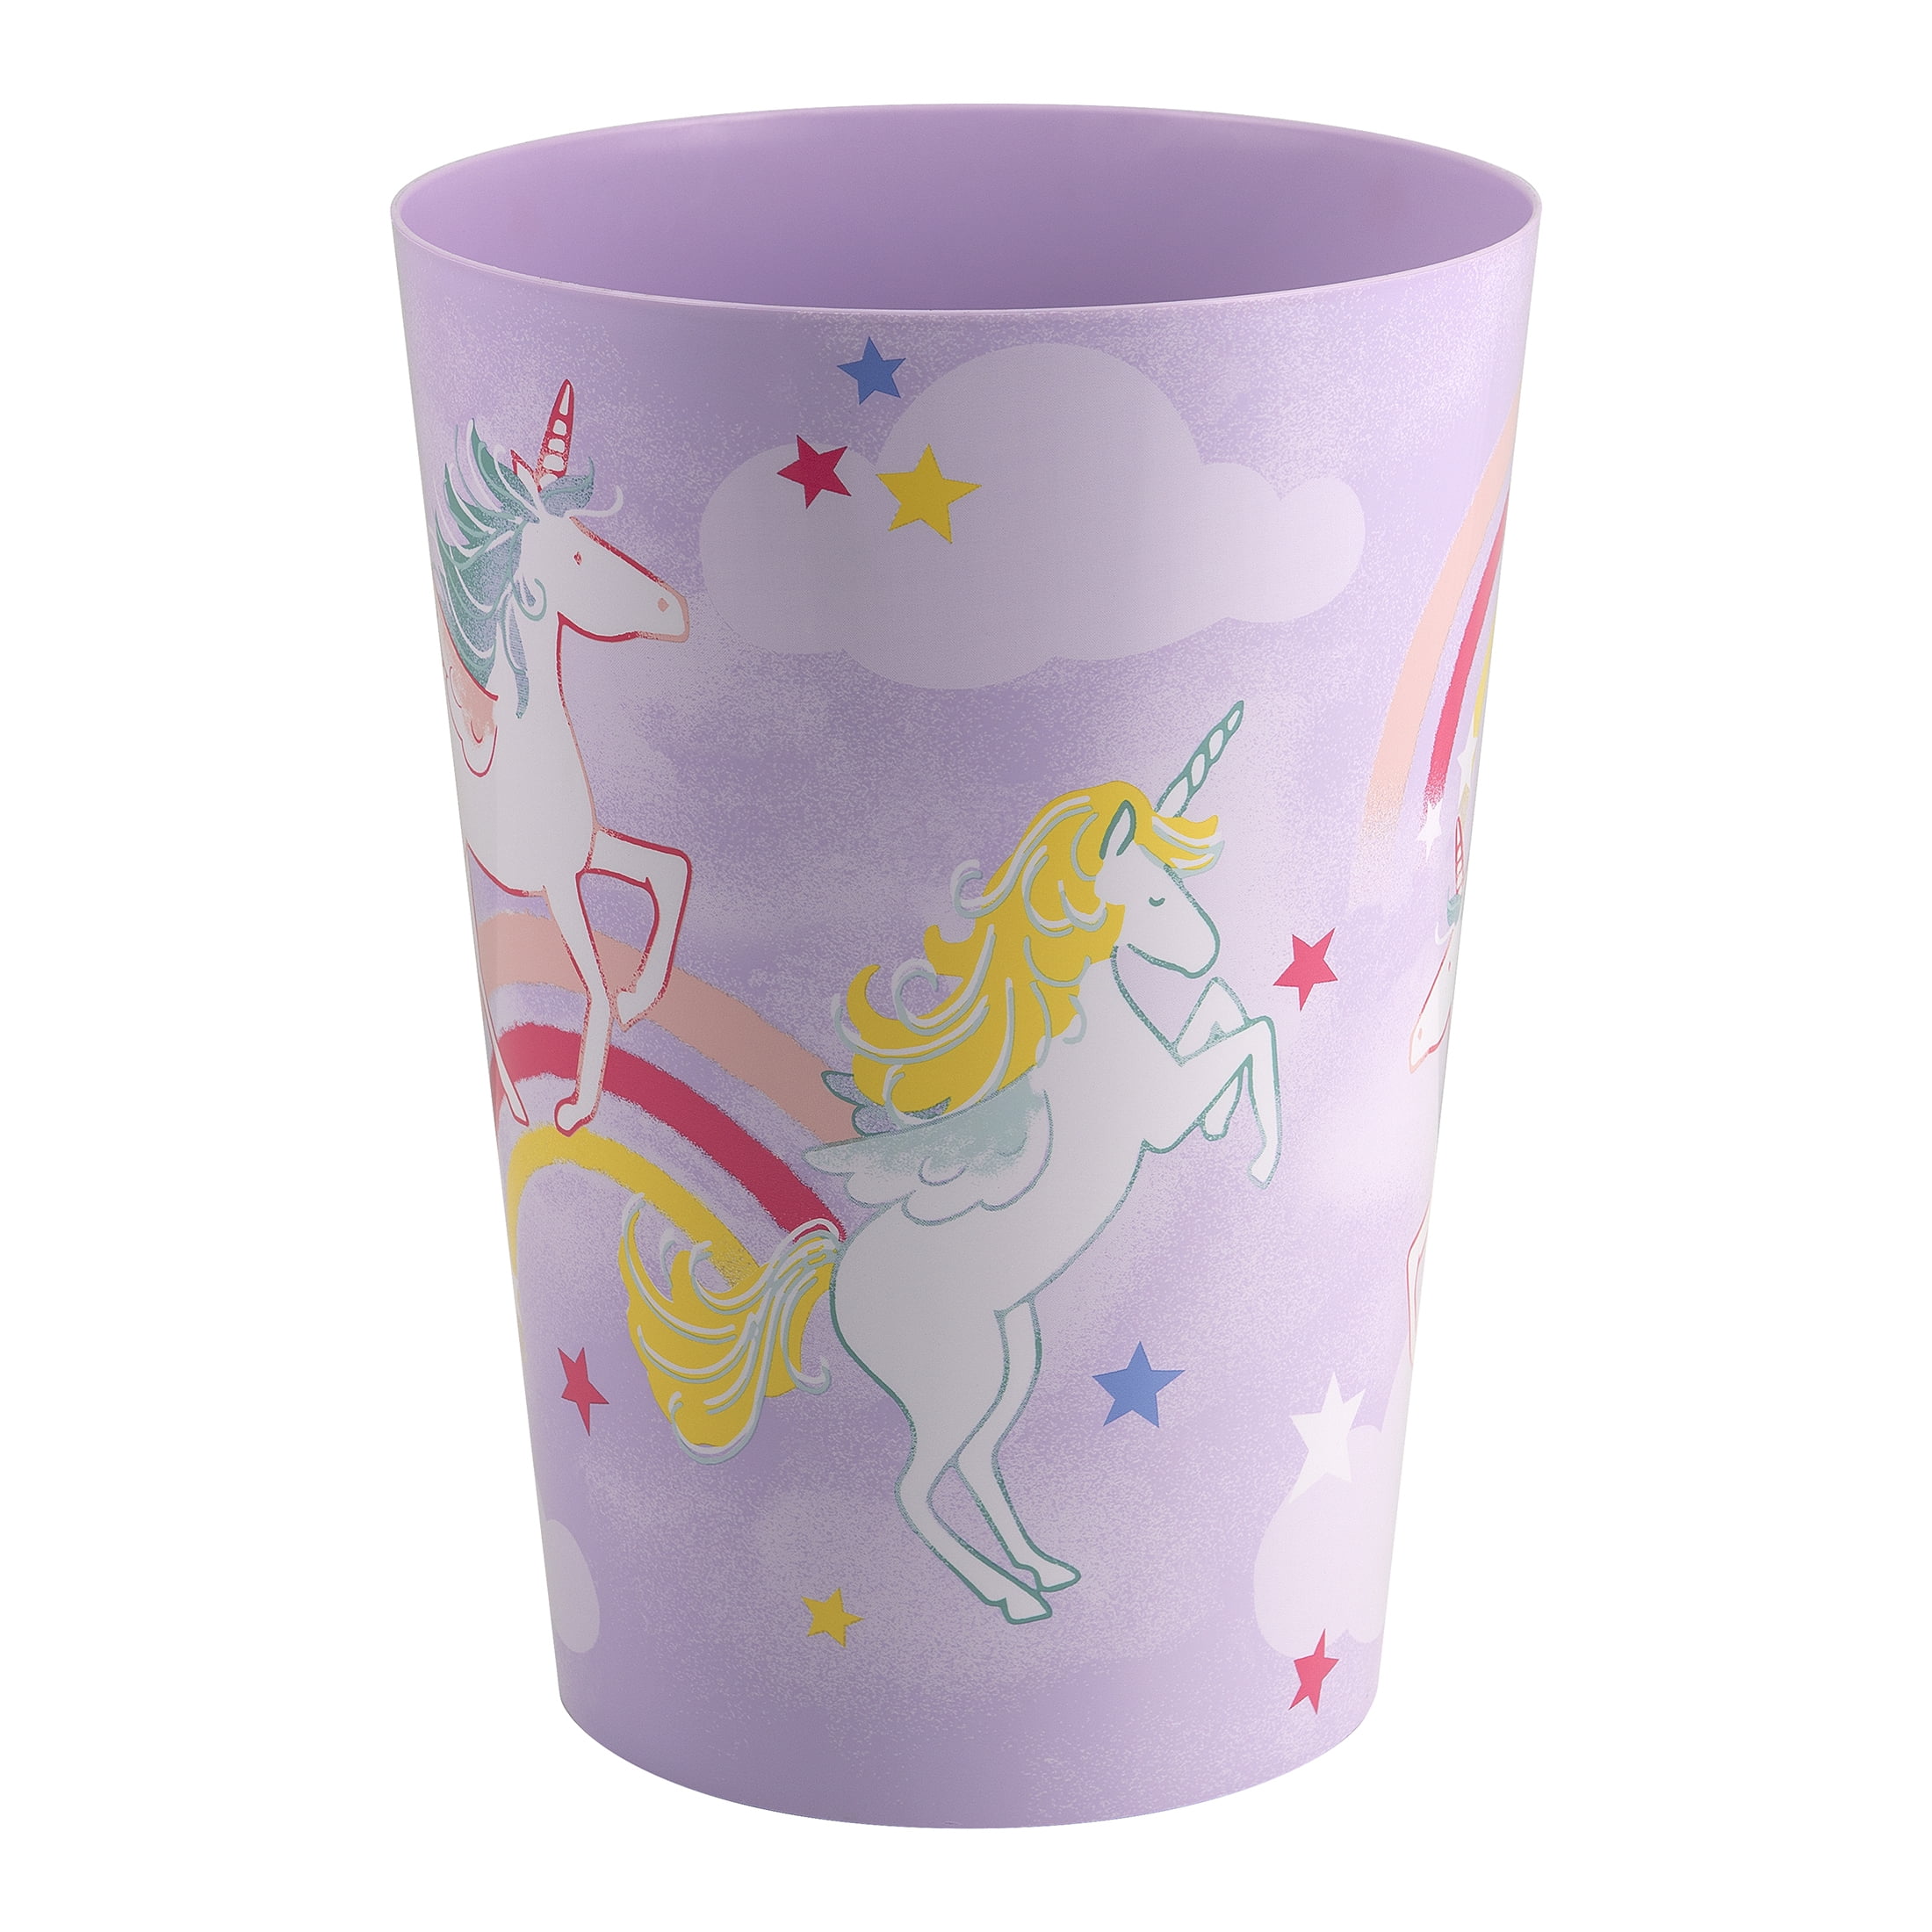 Unicorn Rounded Decaled Plastic Bathroom Trash Can by Your Zone, Multi